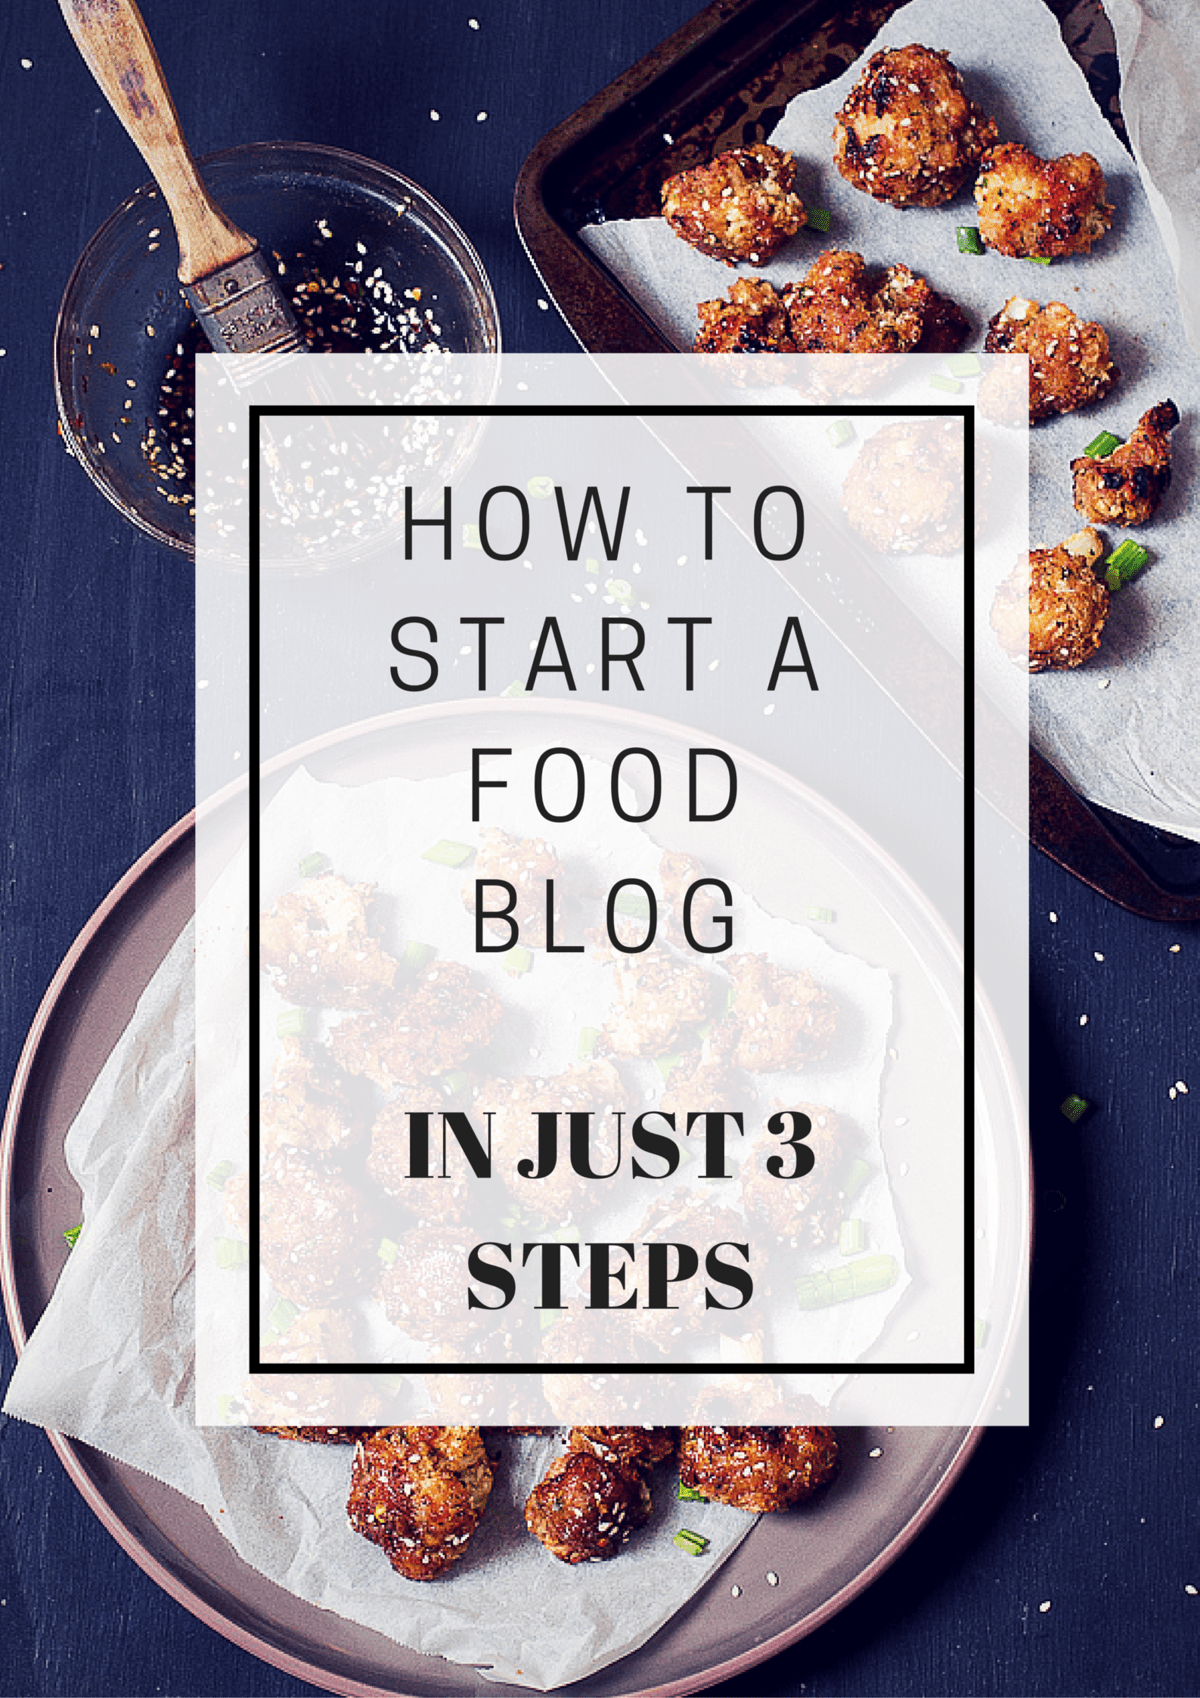 How to Start a Food Blog in Just 3 Steps